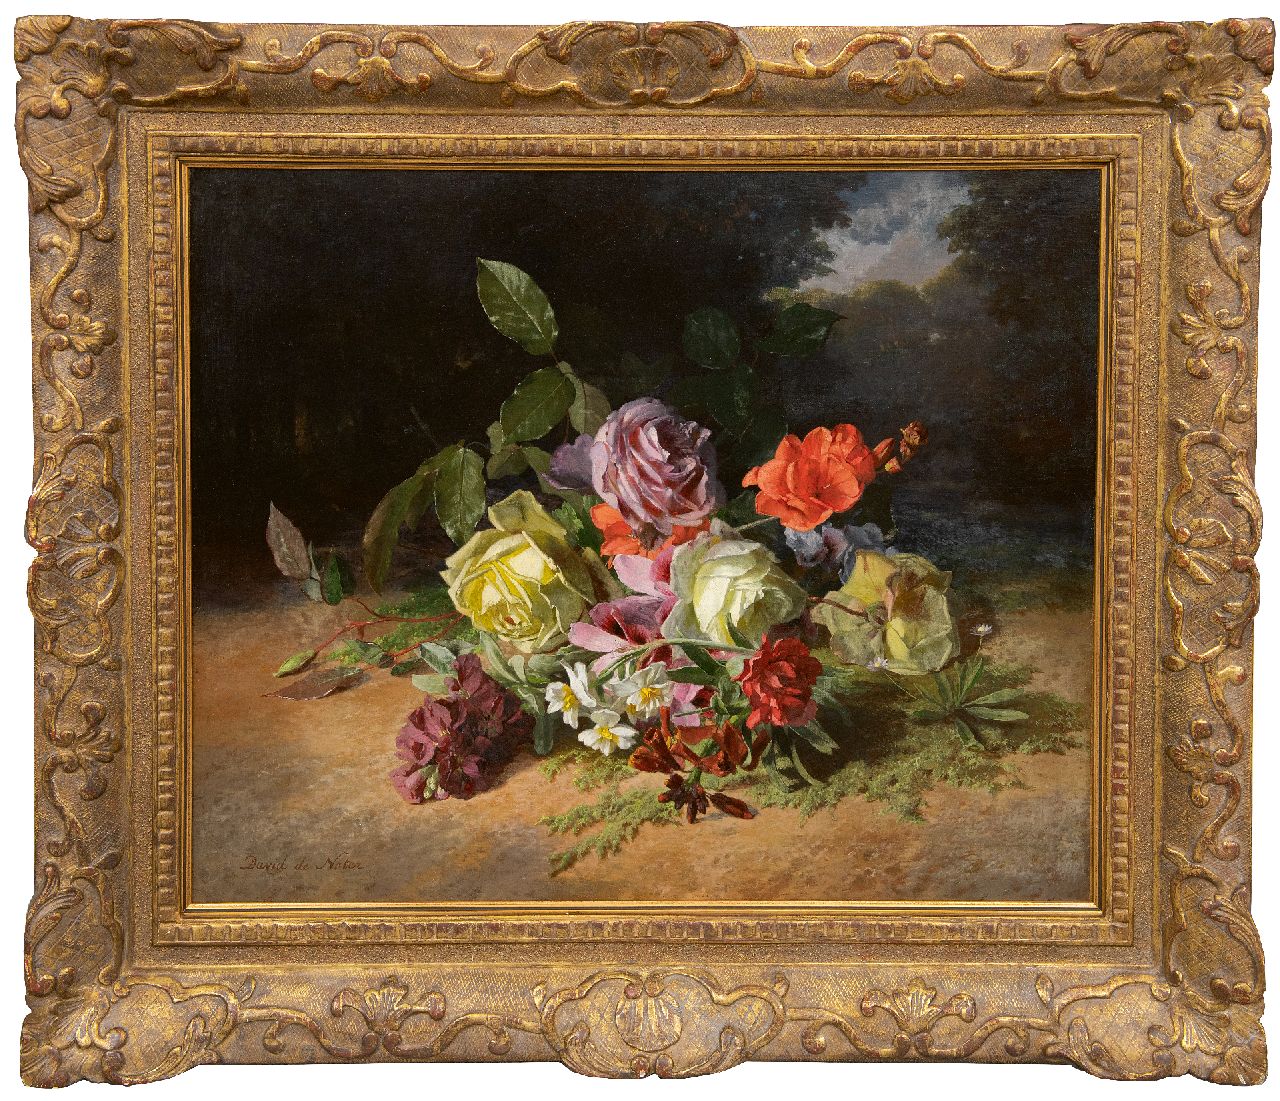 Noter D.E.J. de | 'David' Emile Joseph de Noter | Paintings offered for sale | Roses and summer flowers on the forest floor, oil on canvas 46.3 x 55.1 cm, signed l.l. and on the stretcher